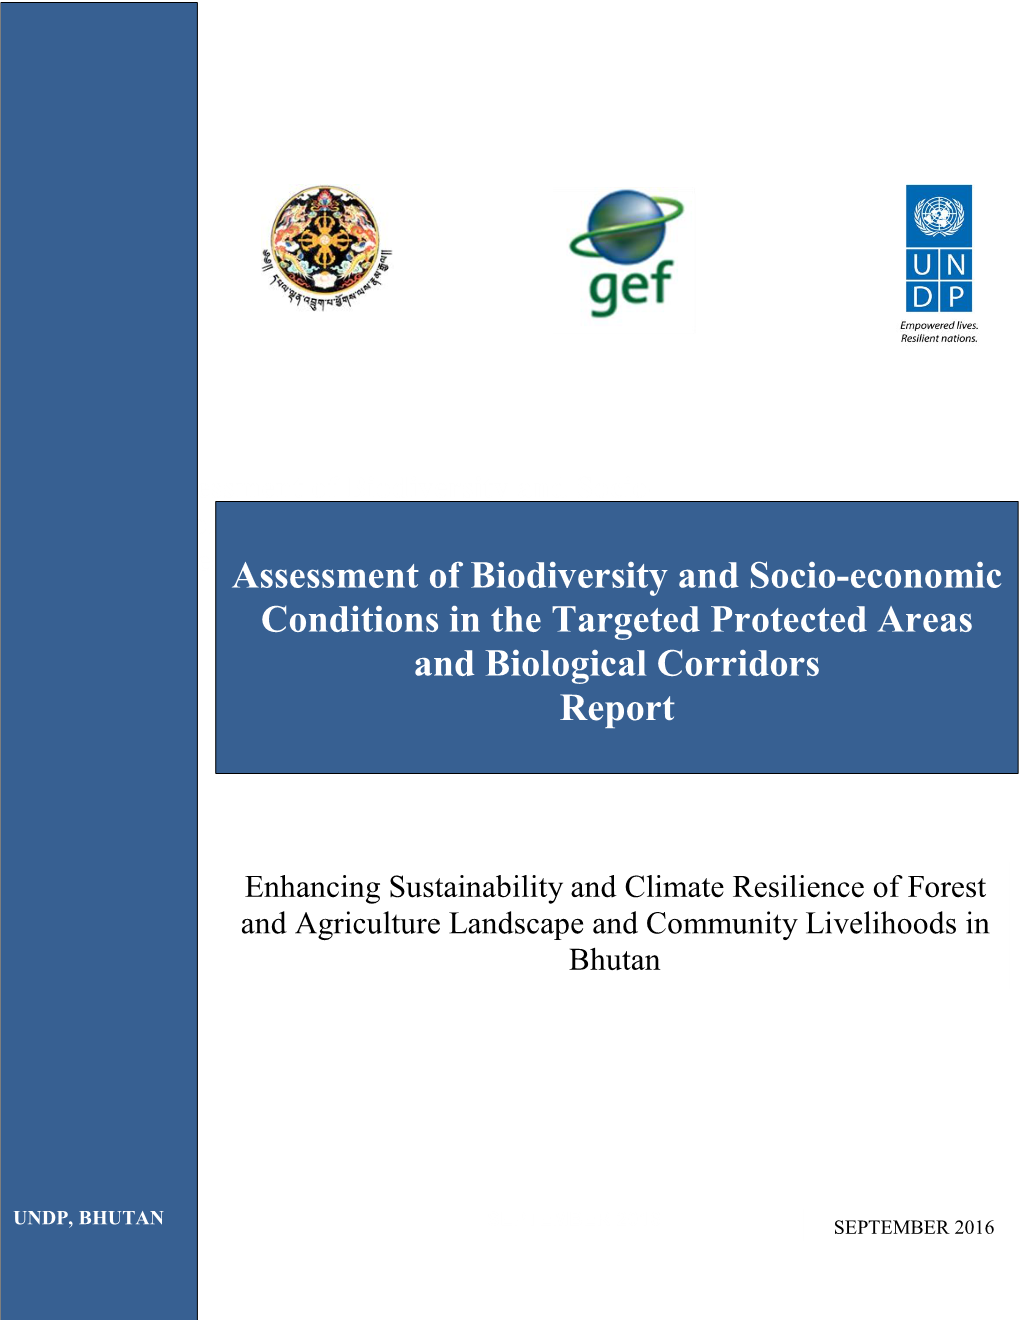 Assessment of Biodiversity and Socio-Economic Conditions in The